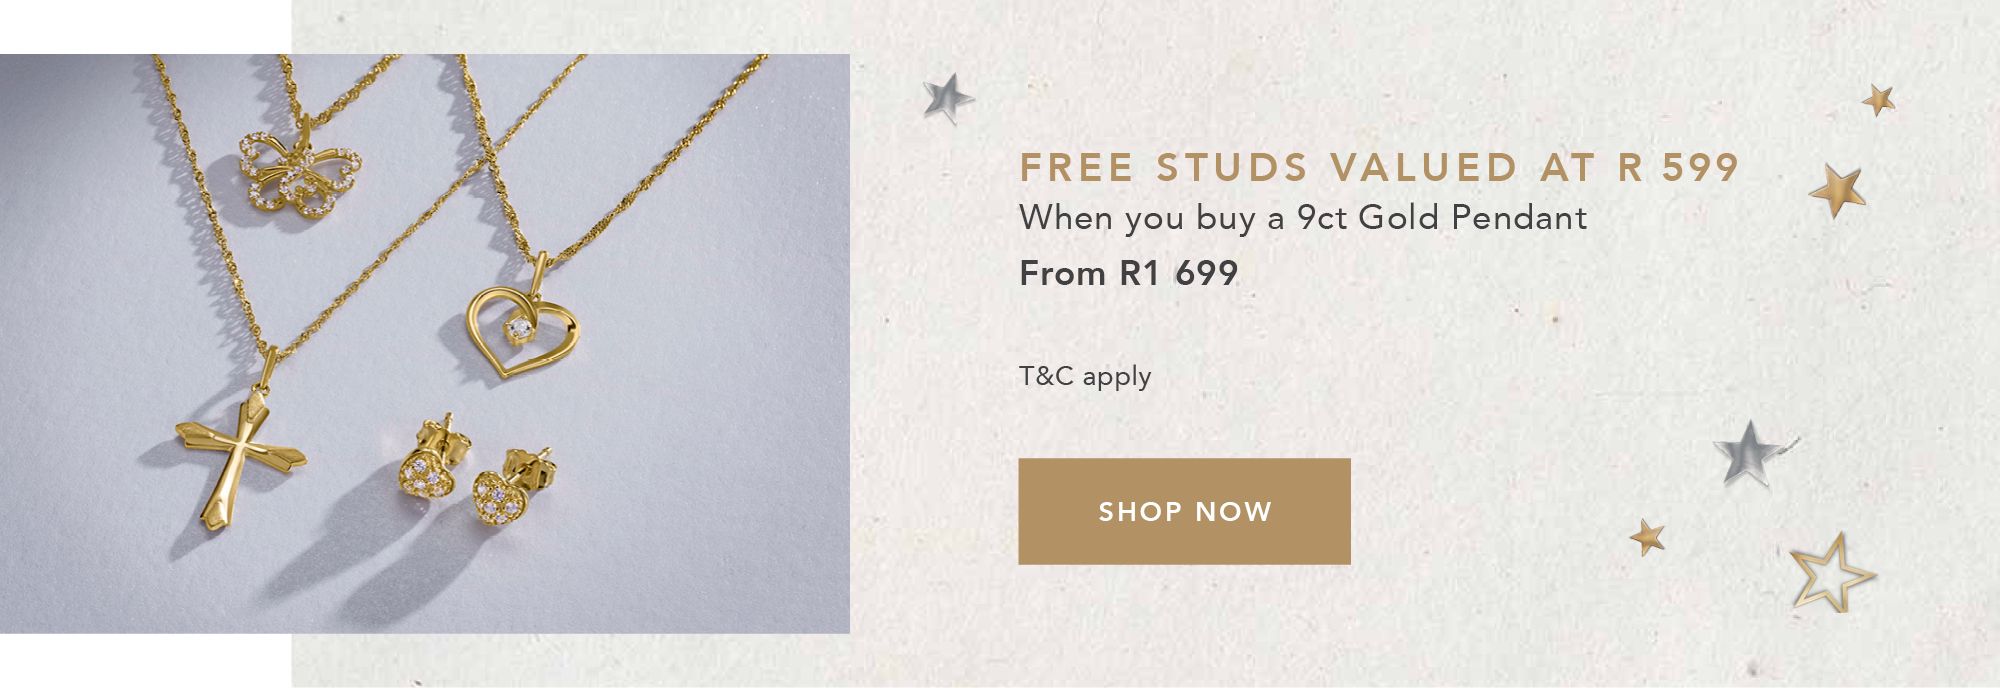 FREE STUDS VALUED AT R599 When you buy a 9ct Gold Pendant From R1 699